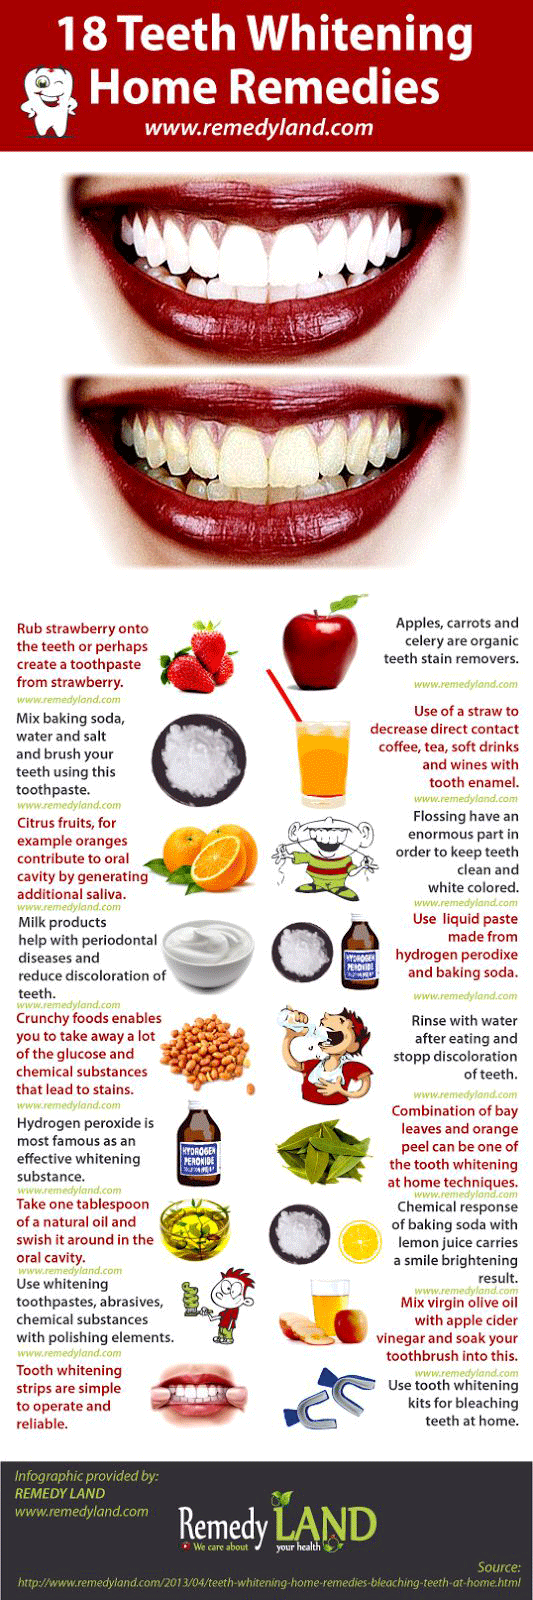 Teeth Whitening Home Remedies Infographic